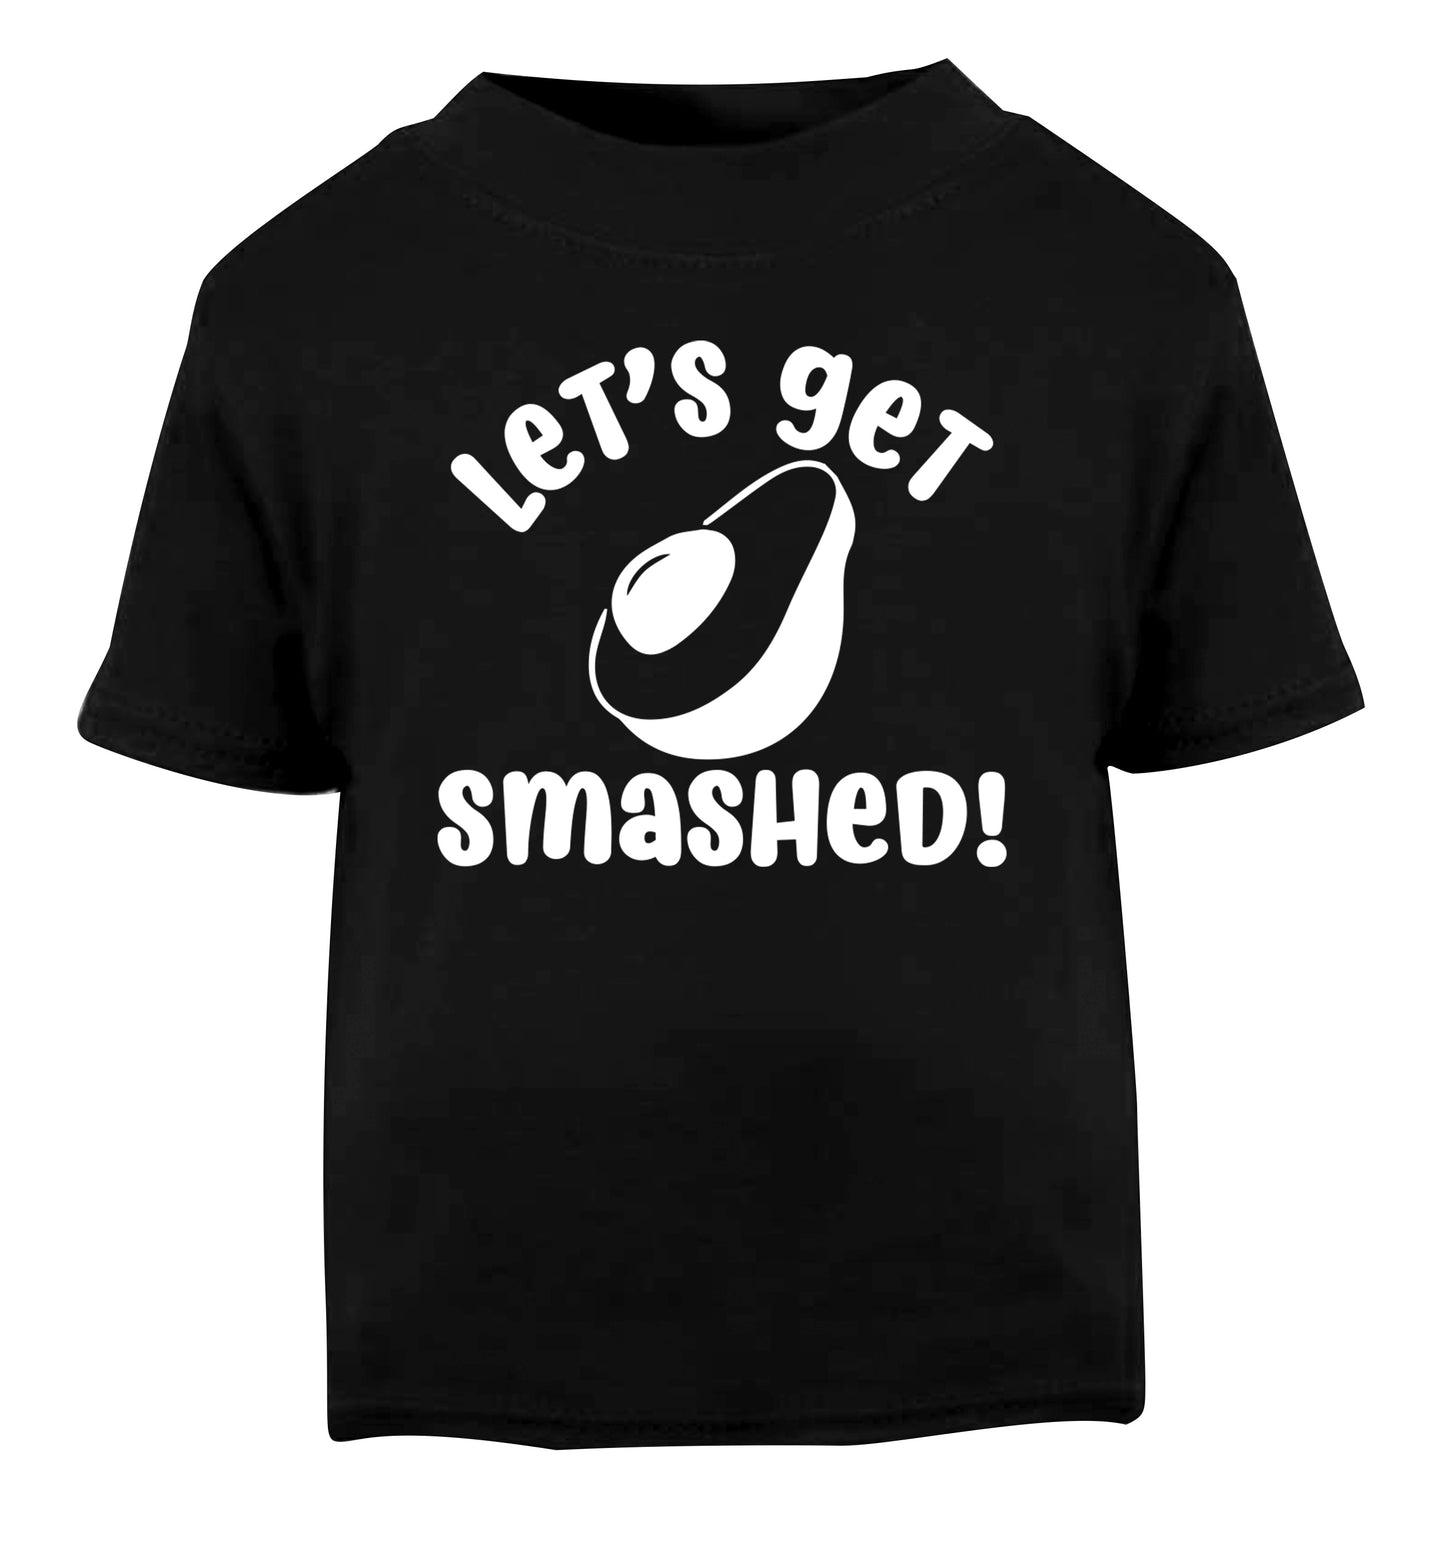 Let's get smashed Black Baby Toddler Tshirt 2 years